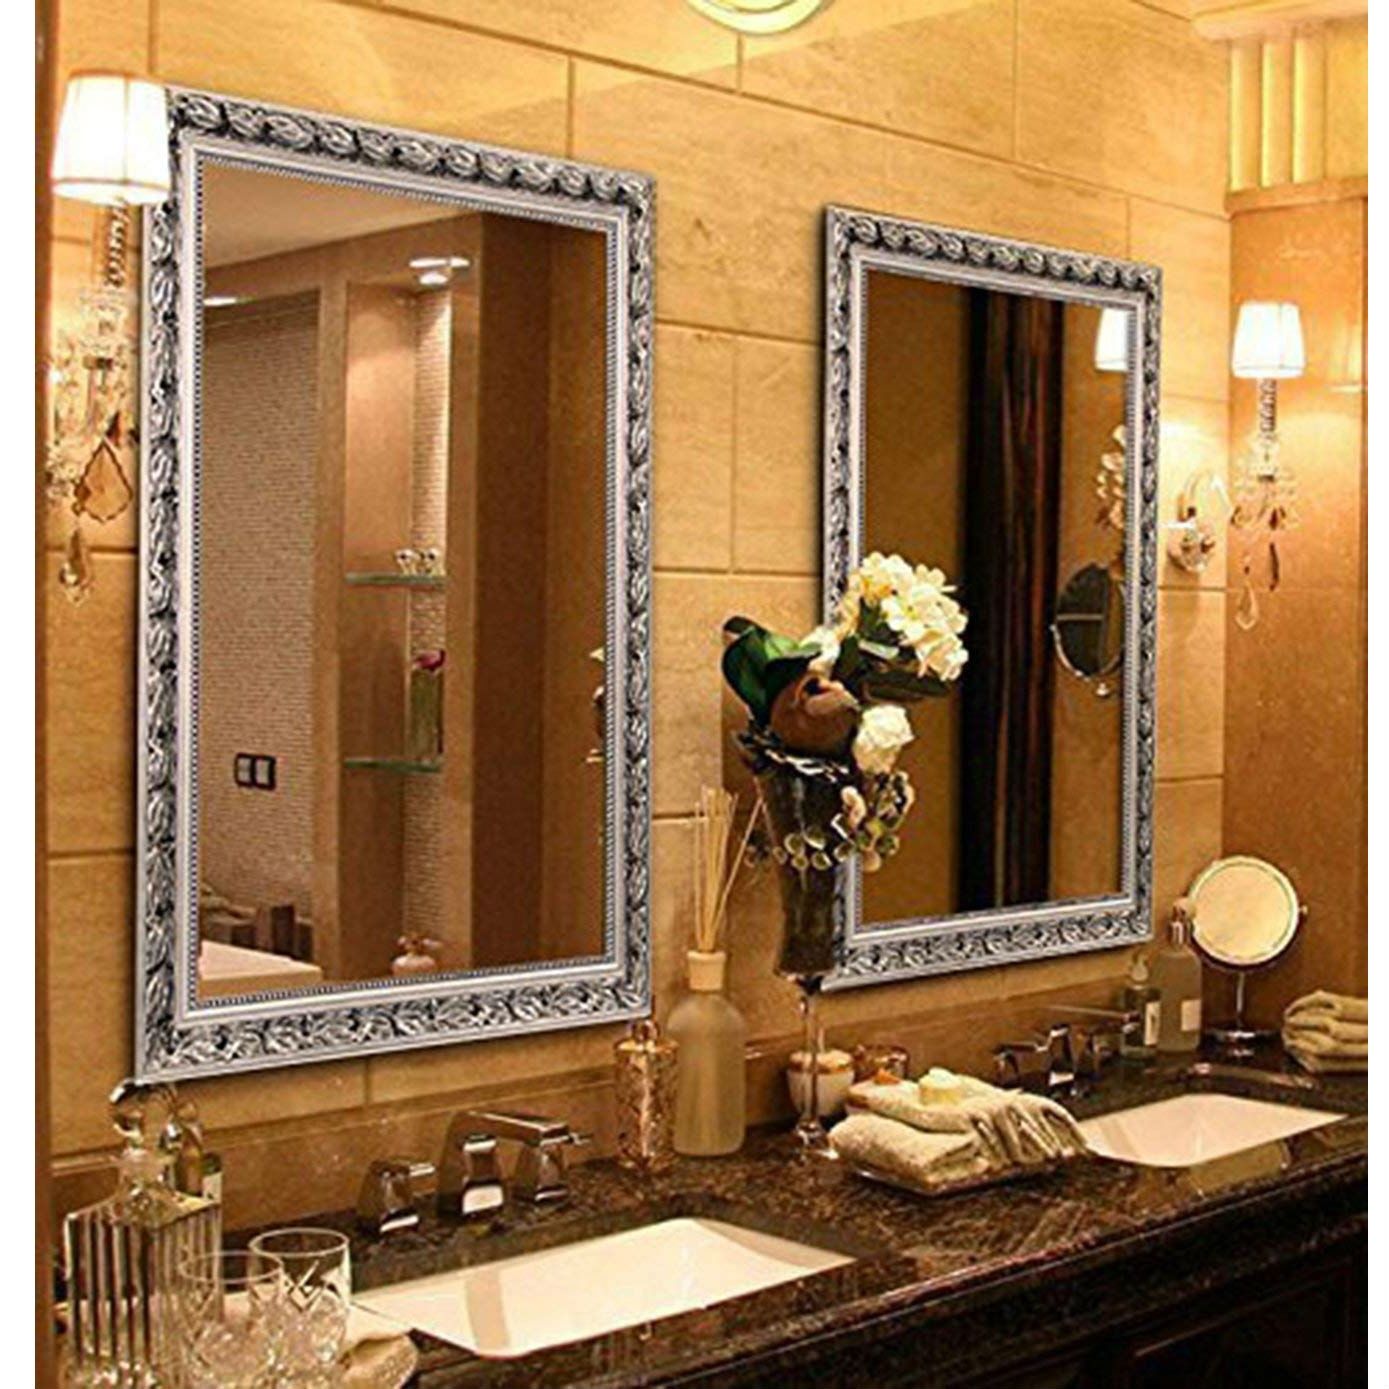 Large 38 X 26 Inch Bathroom Wall Mirror With Baroque Style Silver Wood For Wall Mirrors (Photo 9 of 15)